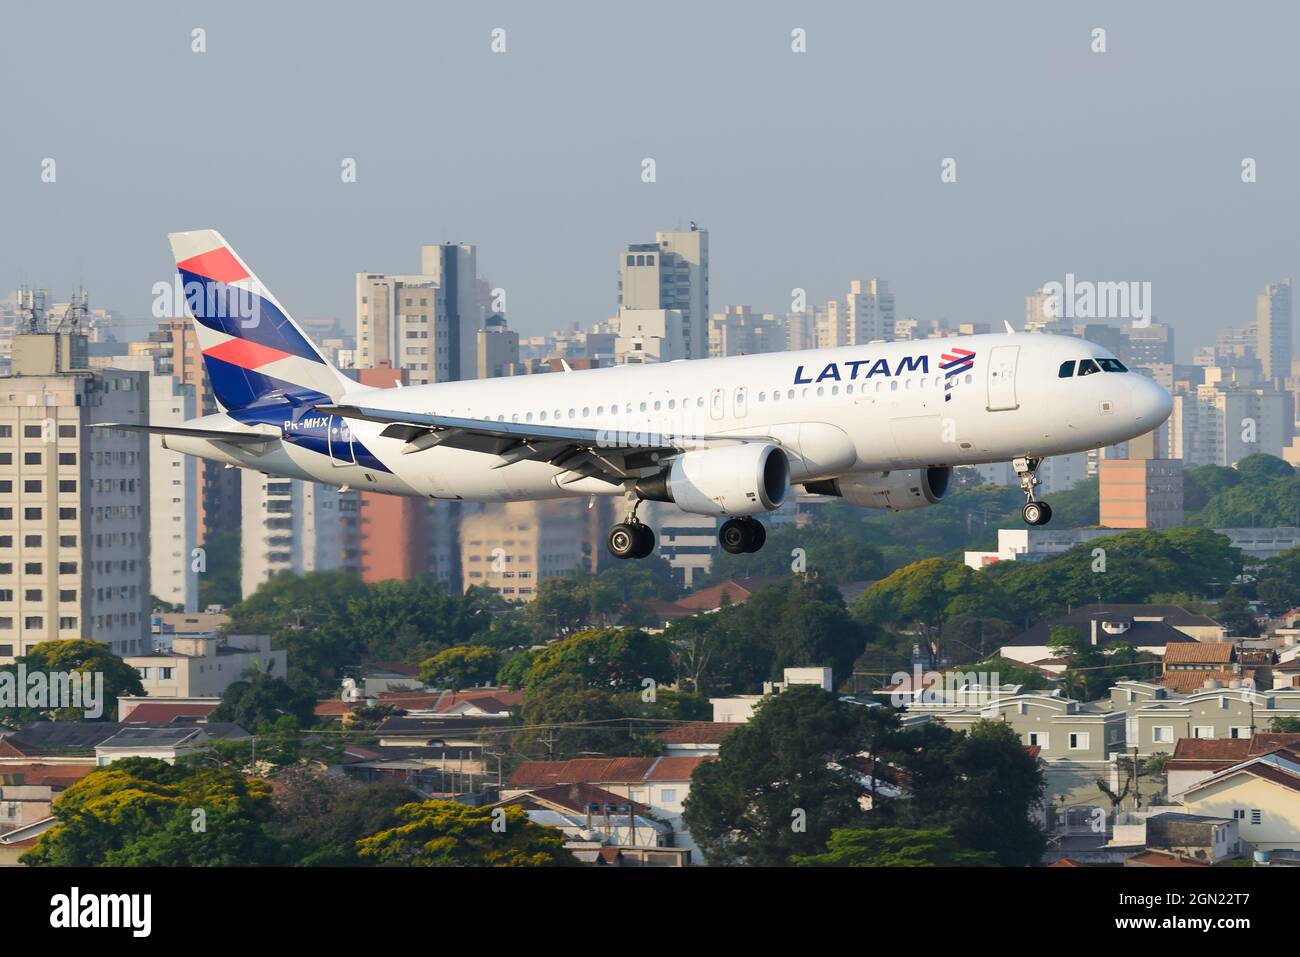 LATAM Airlines Airbus A320 on final approach to Sao Paulo Congonhas Airport in Brazil. Aircraft PR-MHX landing in Brazilian central airport. Stock Photo